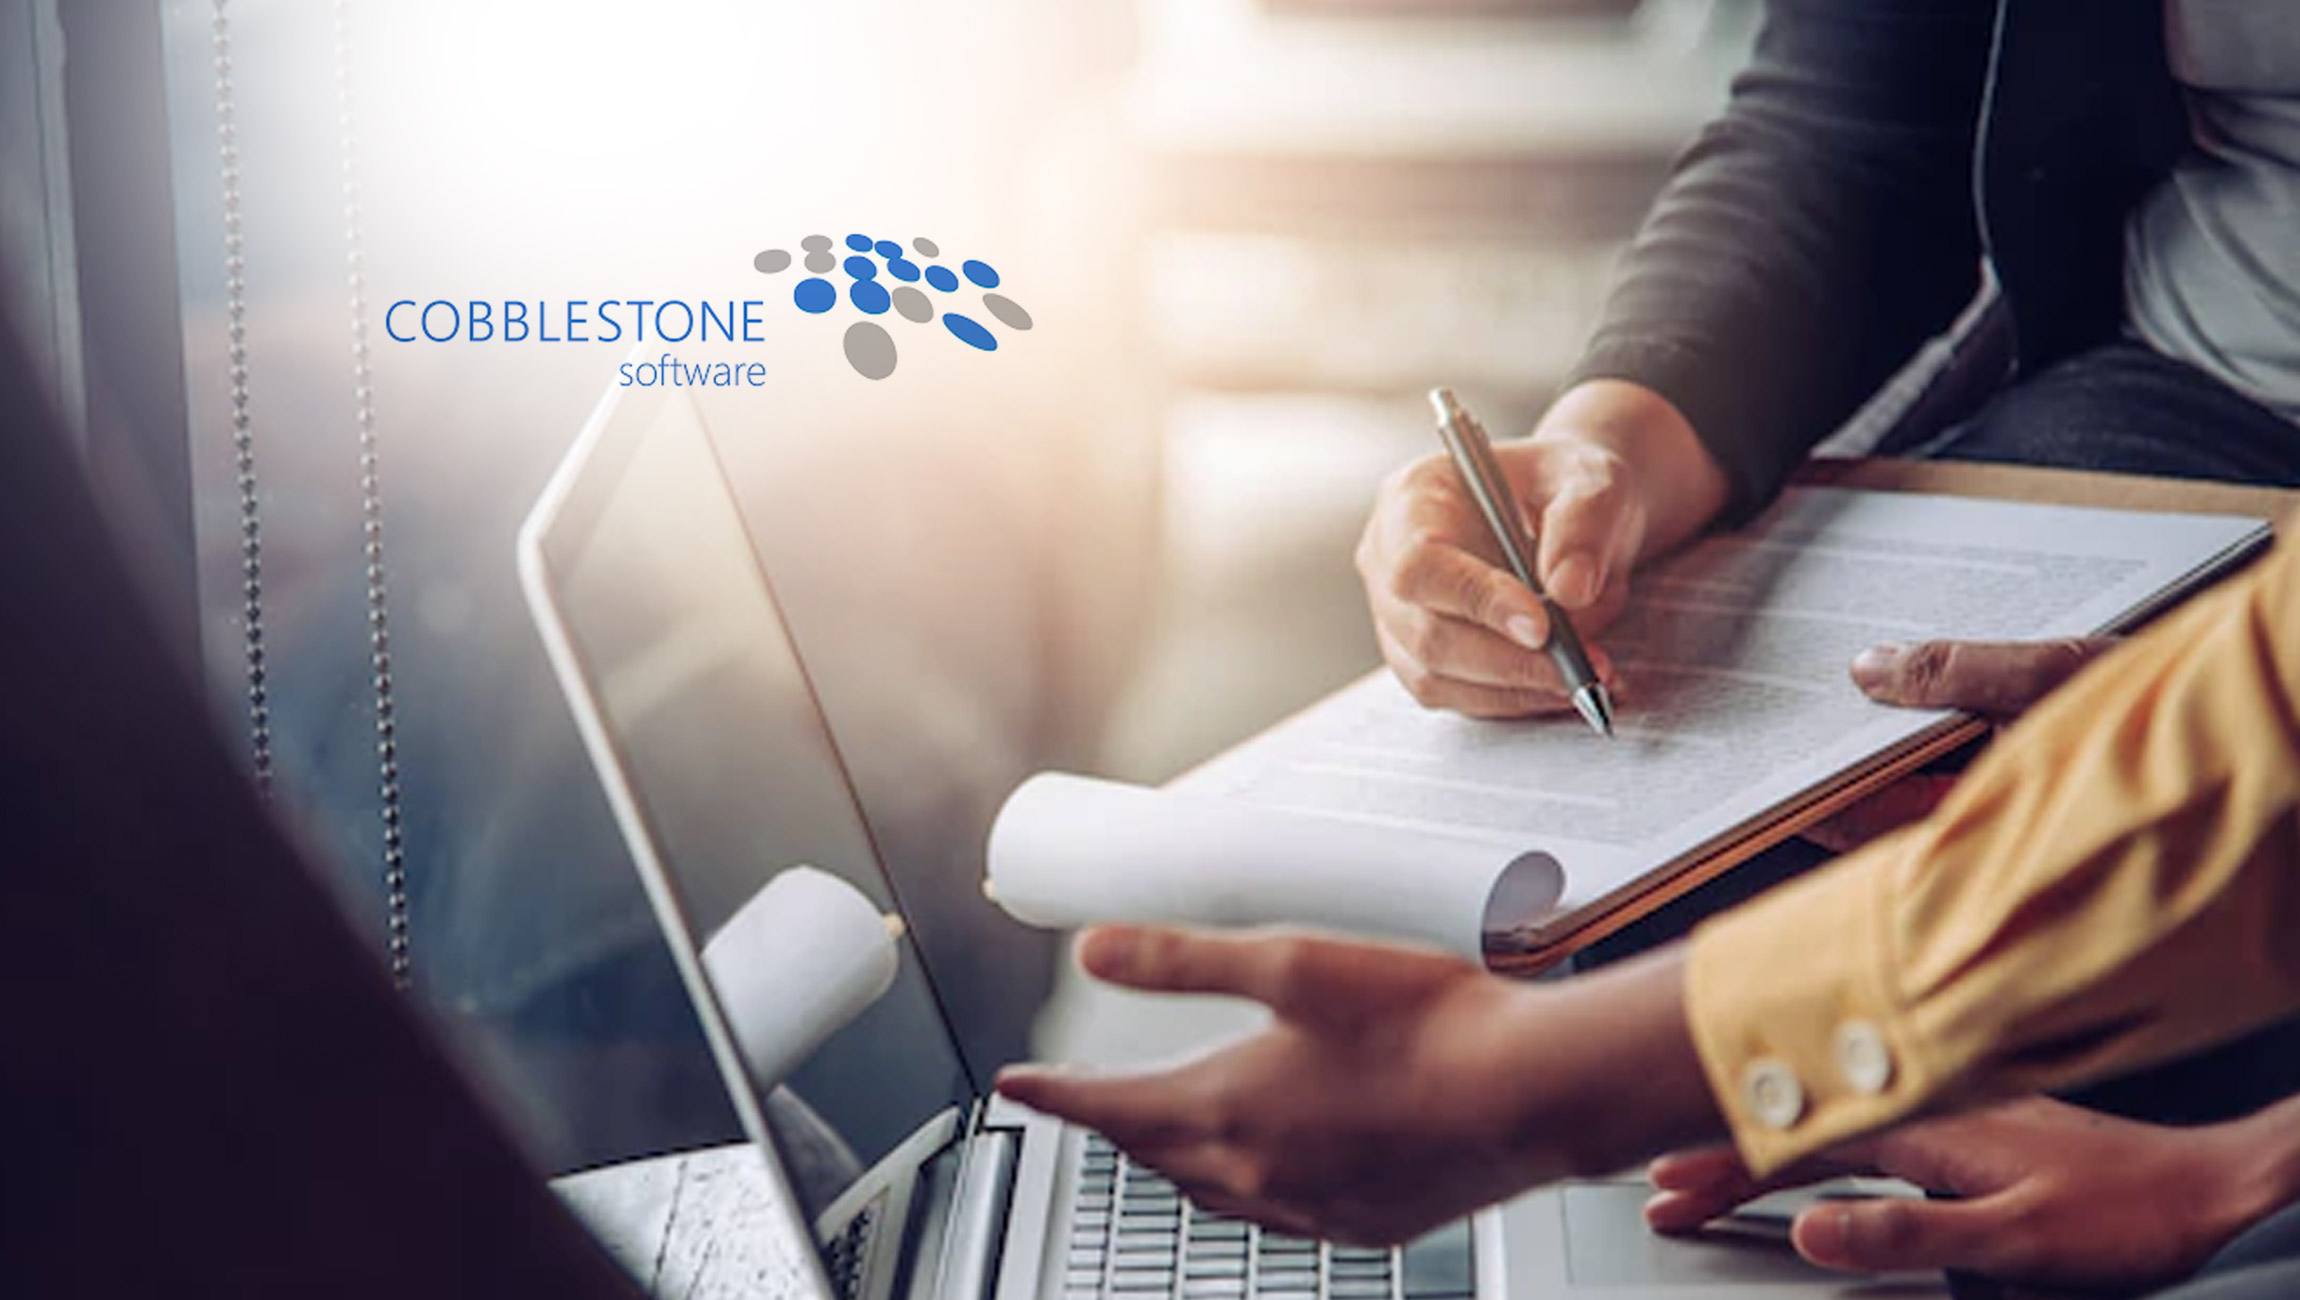 CobbleStone Software Releases Guide on Contract Termination – A Simple, 3 Step Approach